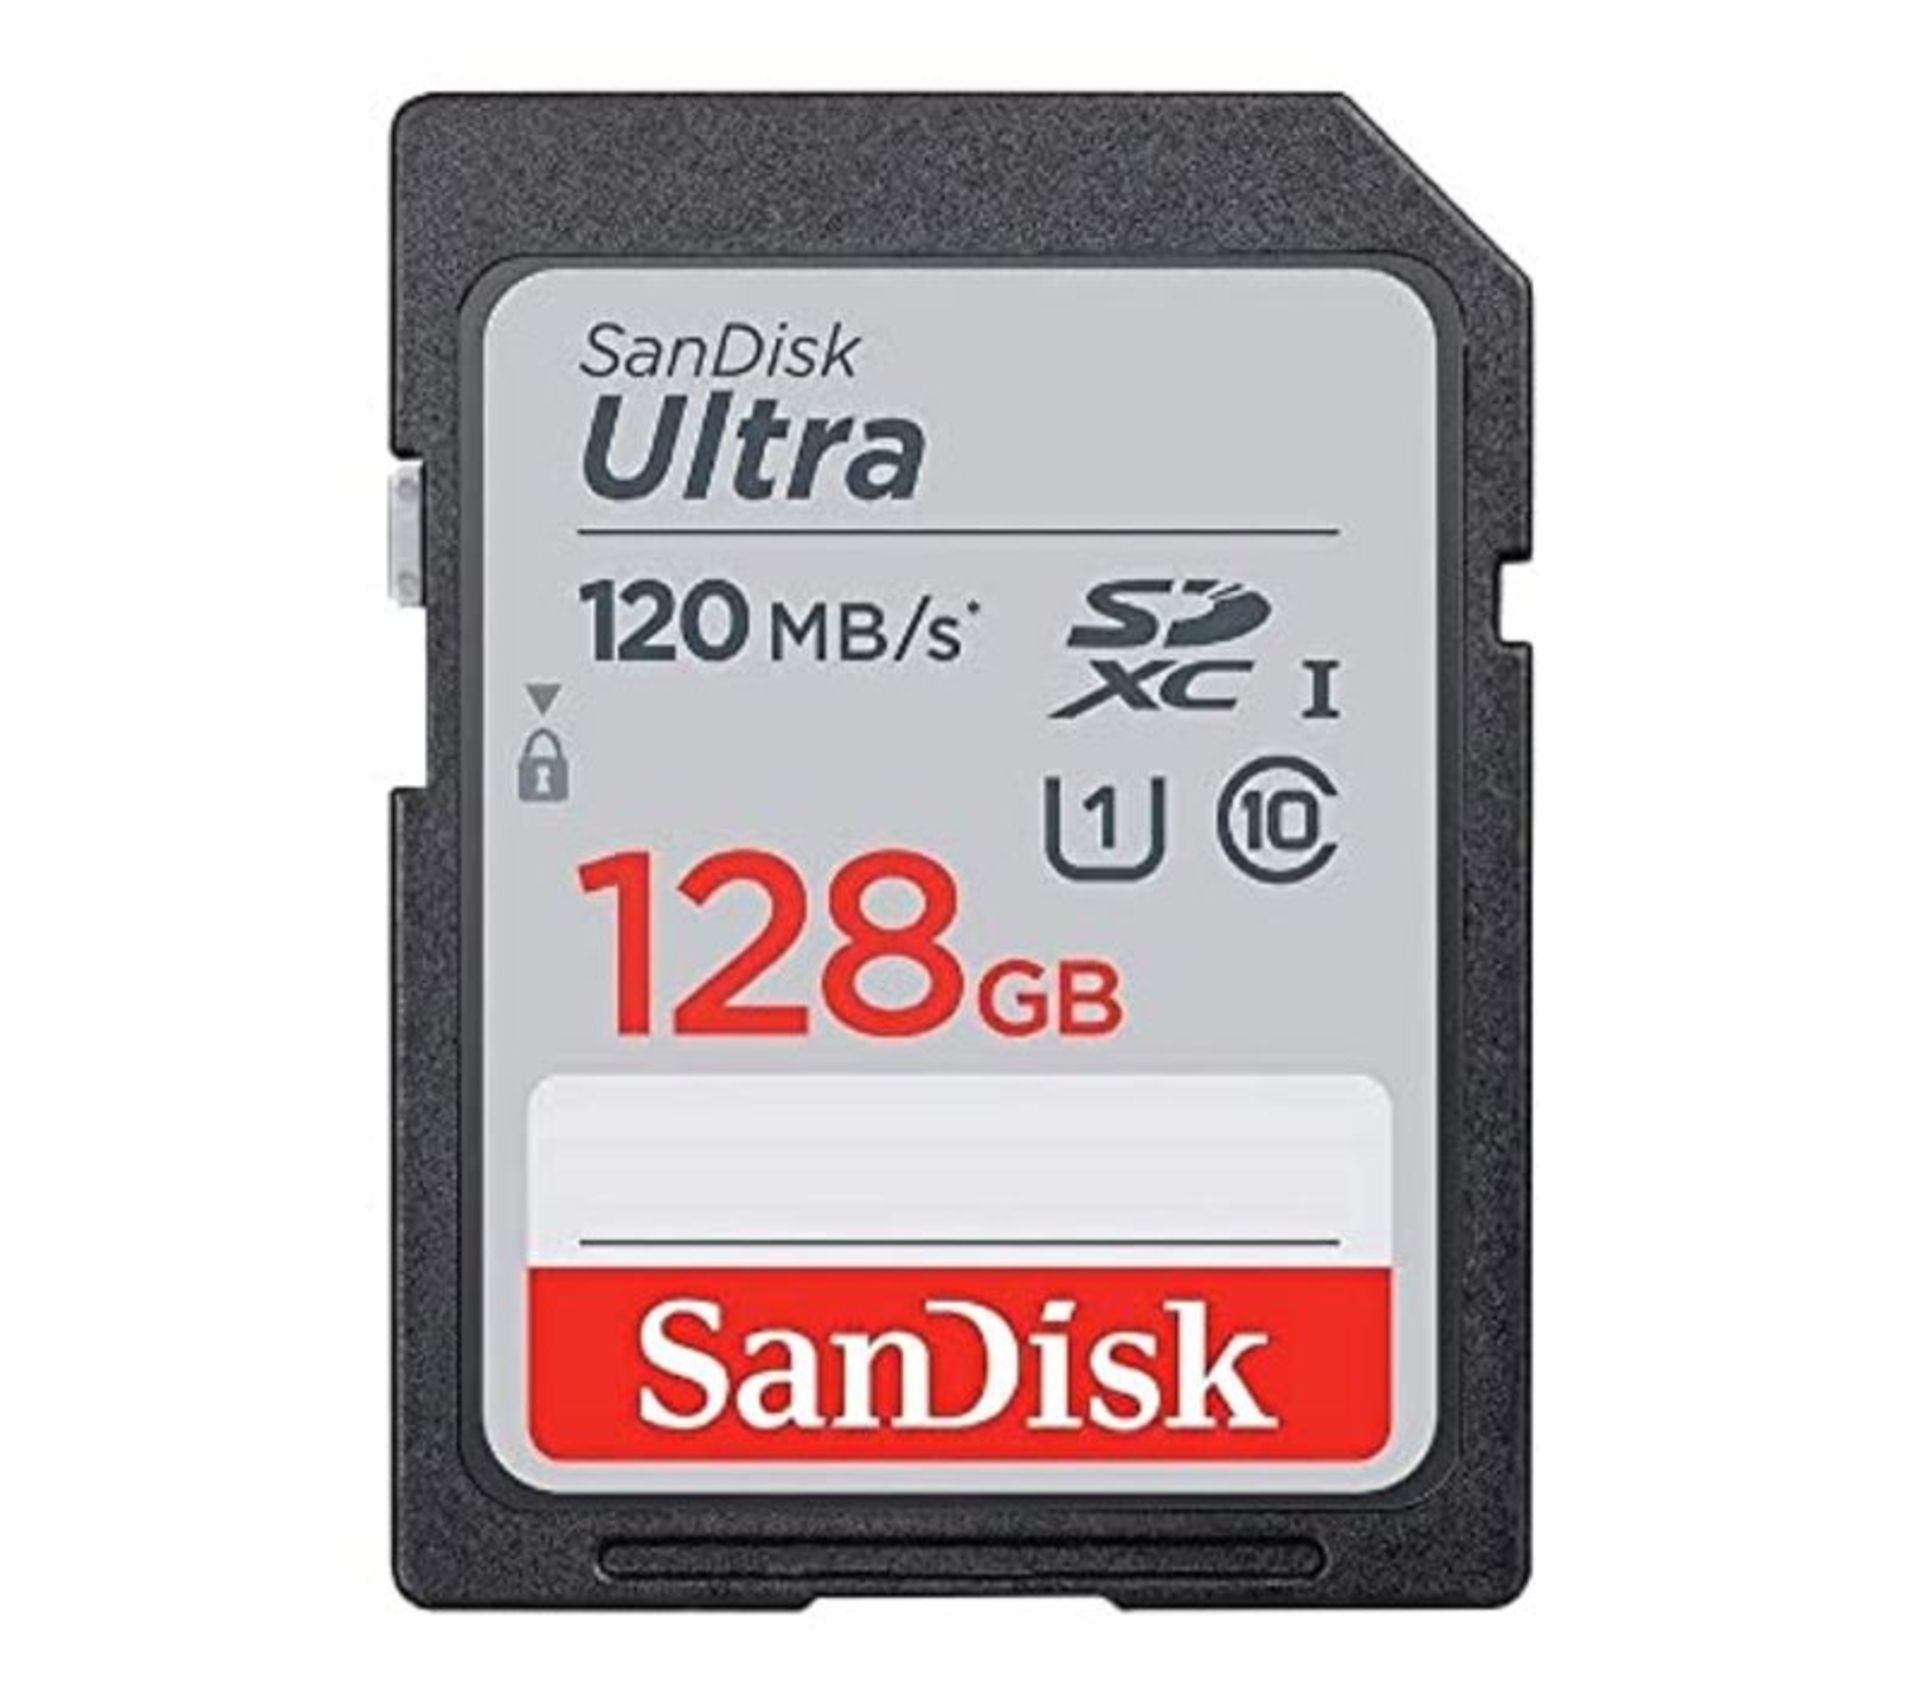 SanDisk Ultra SDXC UHS-I memory card 128 GB (for entry-level and mid-range compact cam